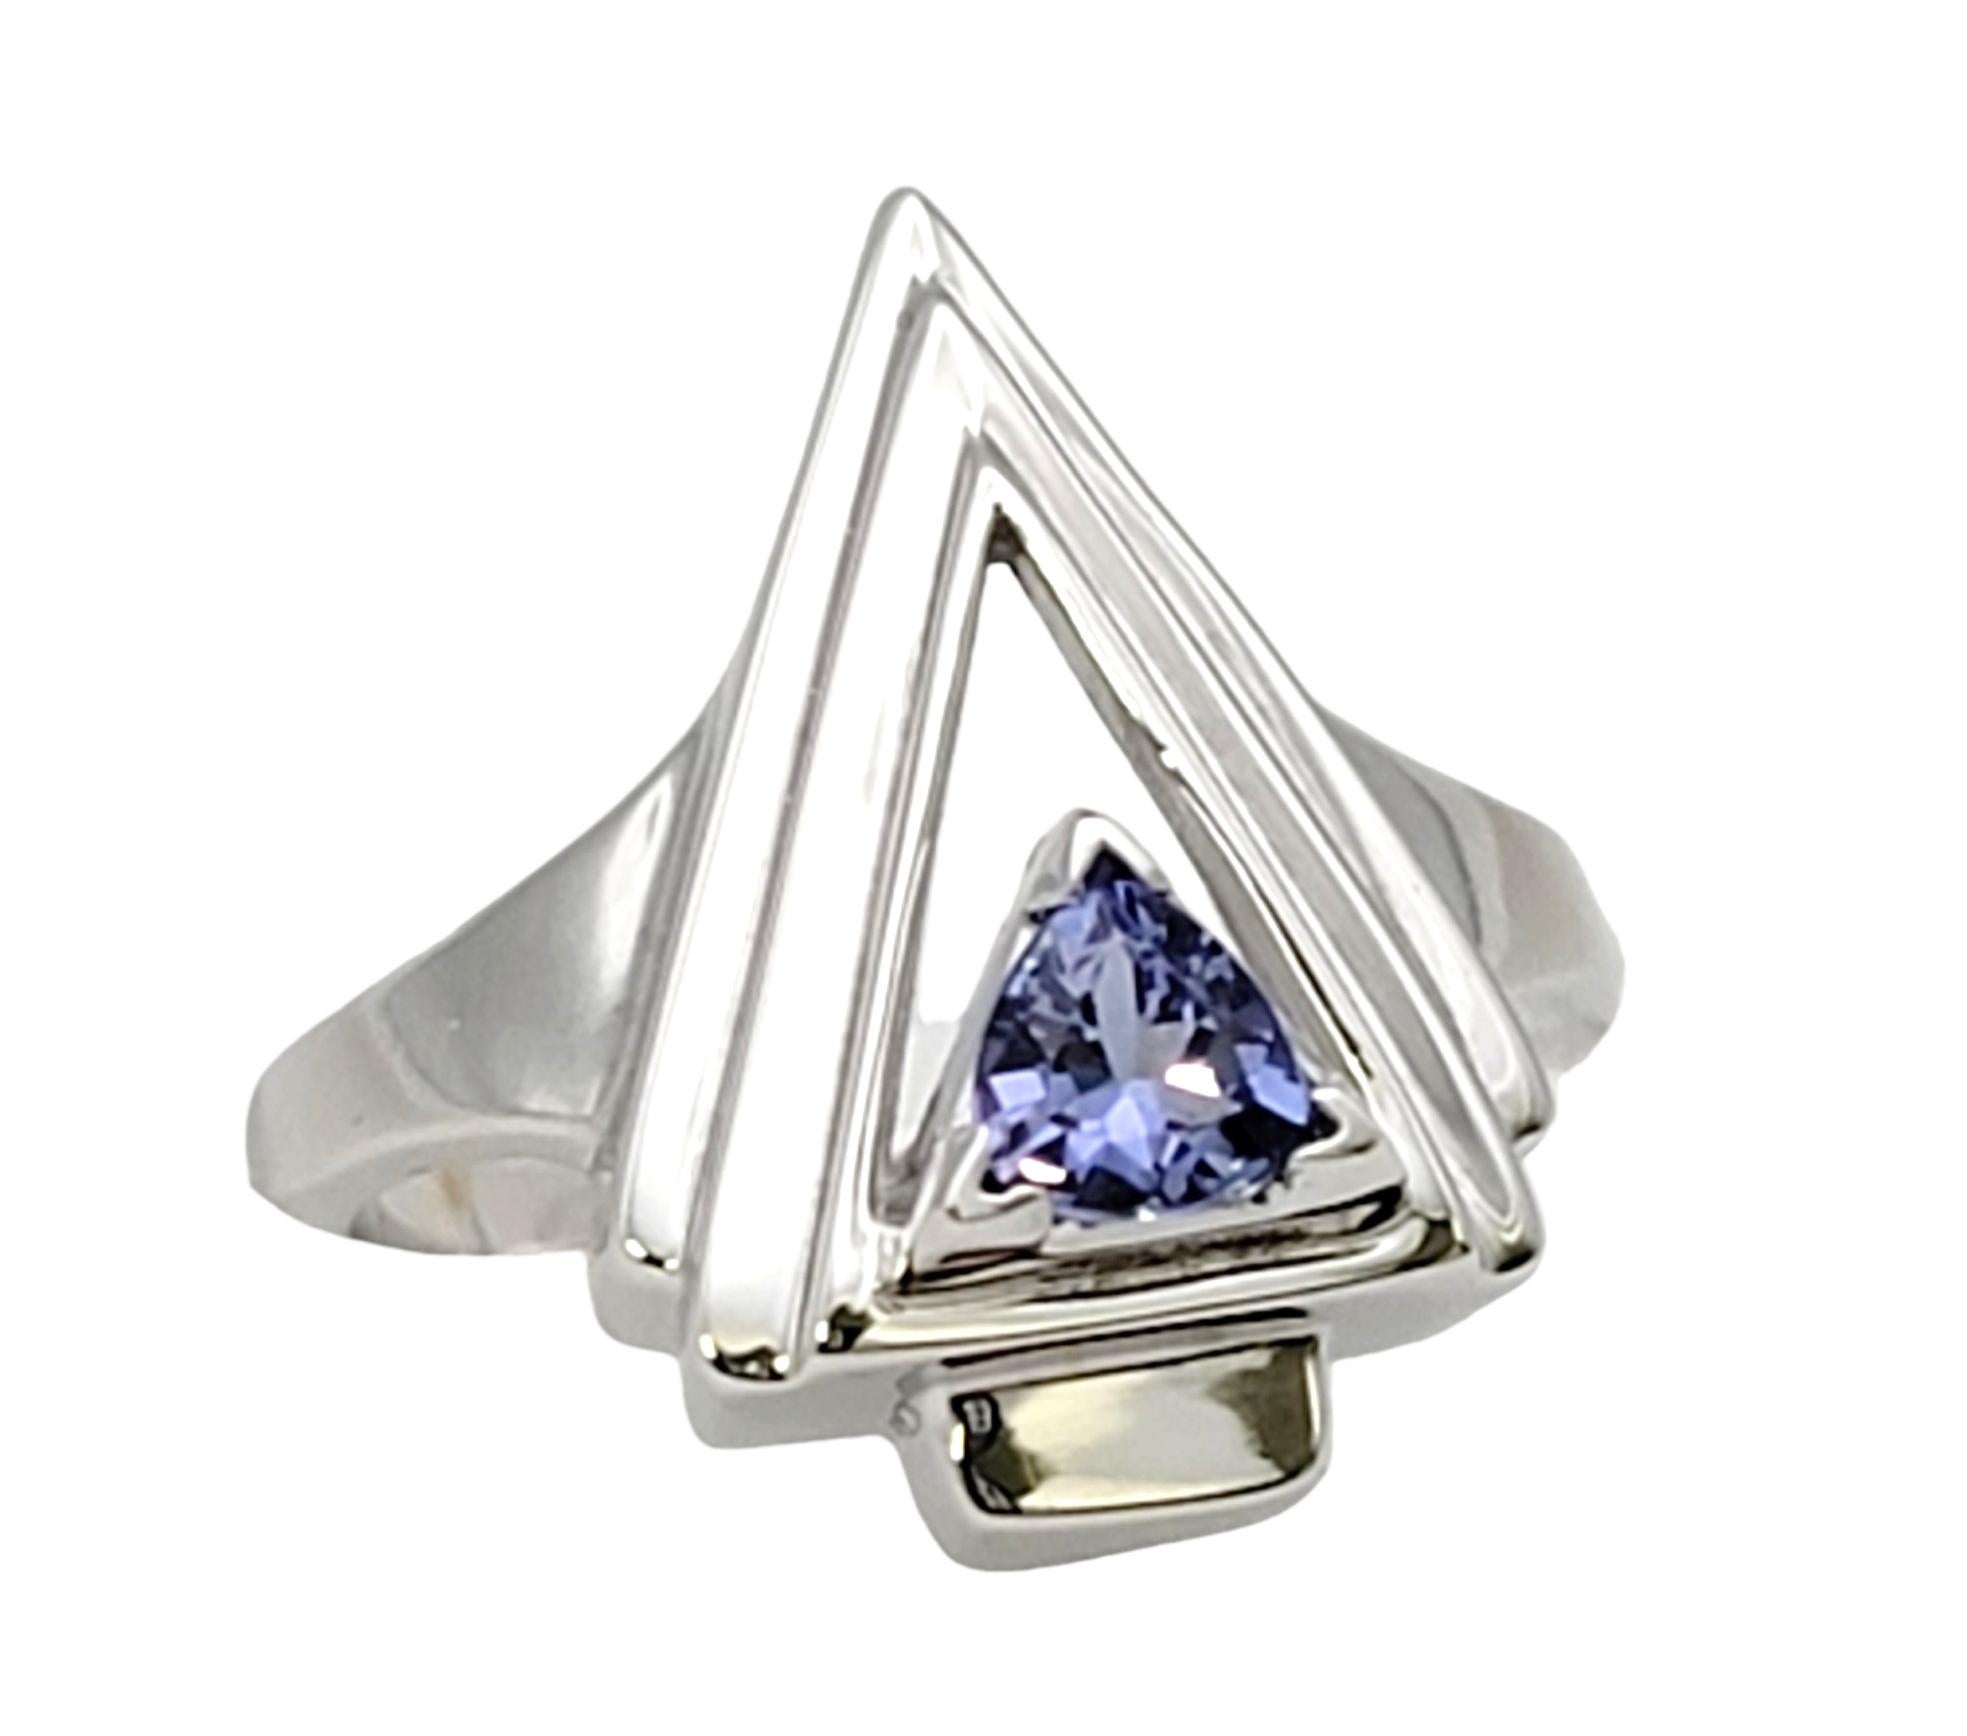 Ring size: 6.75

Sleek contemporary arrow ring in a bright polished platinum setting. The stunning natural violet colored tourmaline stone highlights the modern piece and makes this ring truly shine. 

This lovely ring features a gorgeous .50 carat